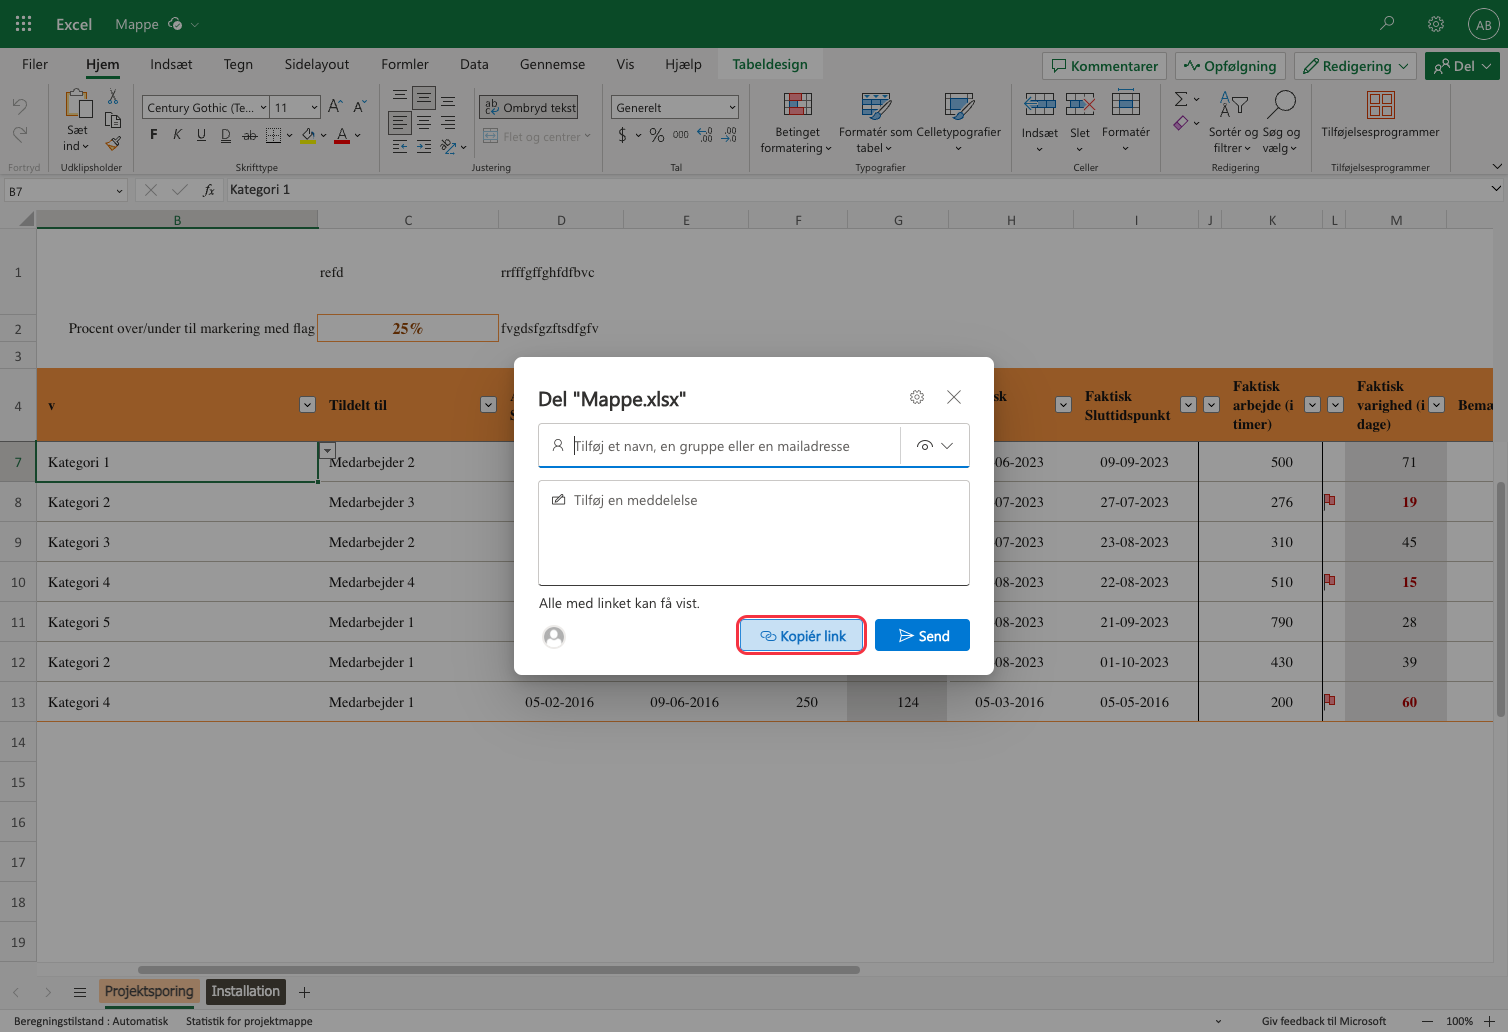 An Excel spreadsheet titled 'Mappe.xlsx' is open with a 'Share' dialog box overlaid, prompting to enter a name or email address and an option to copy the link for sharing.